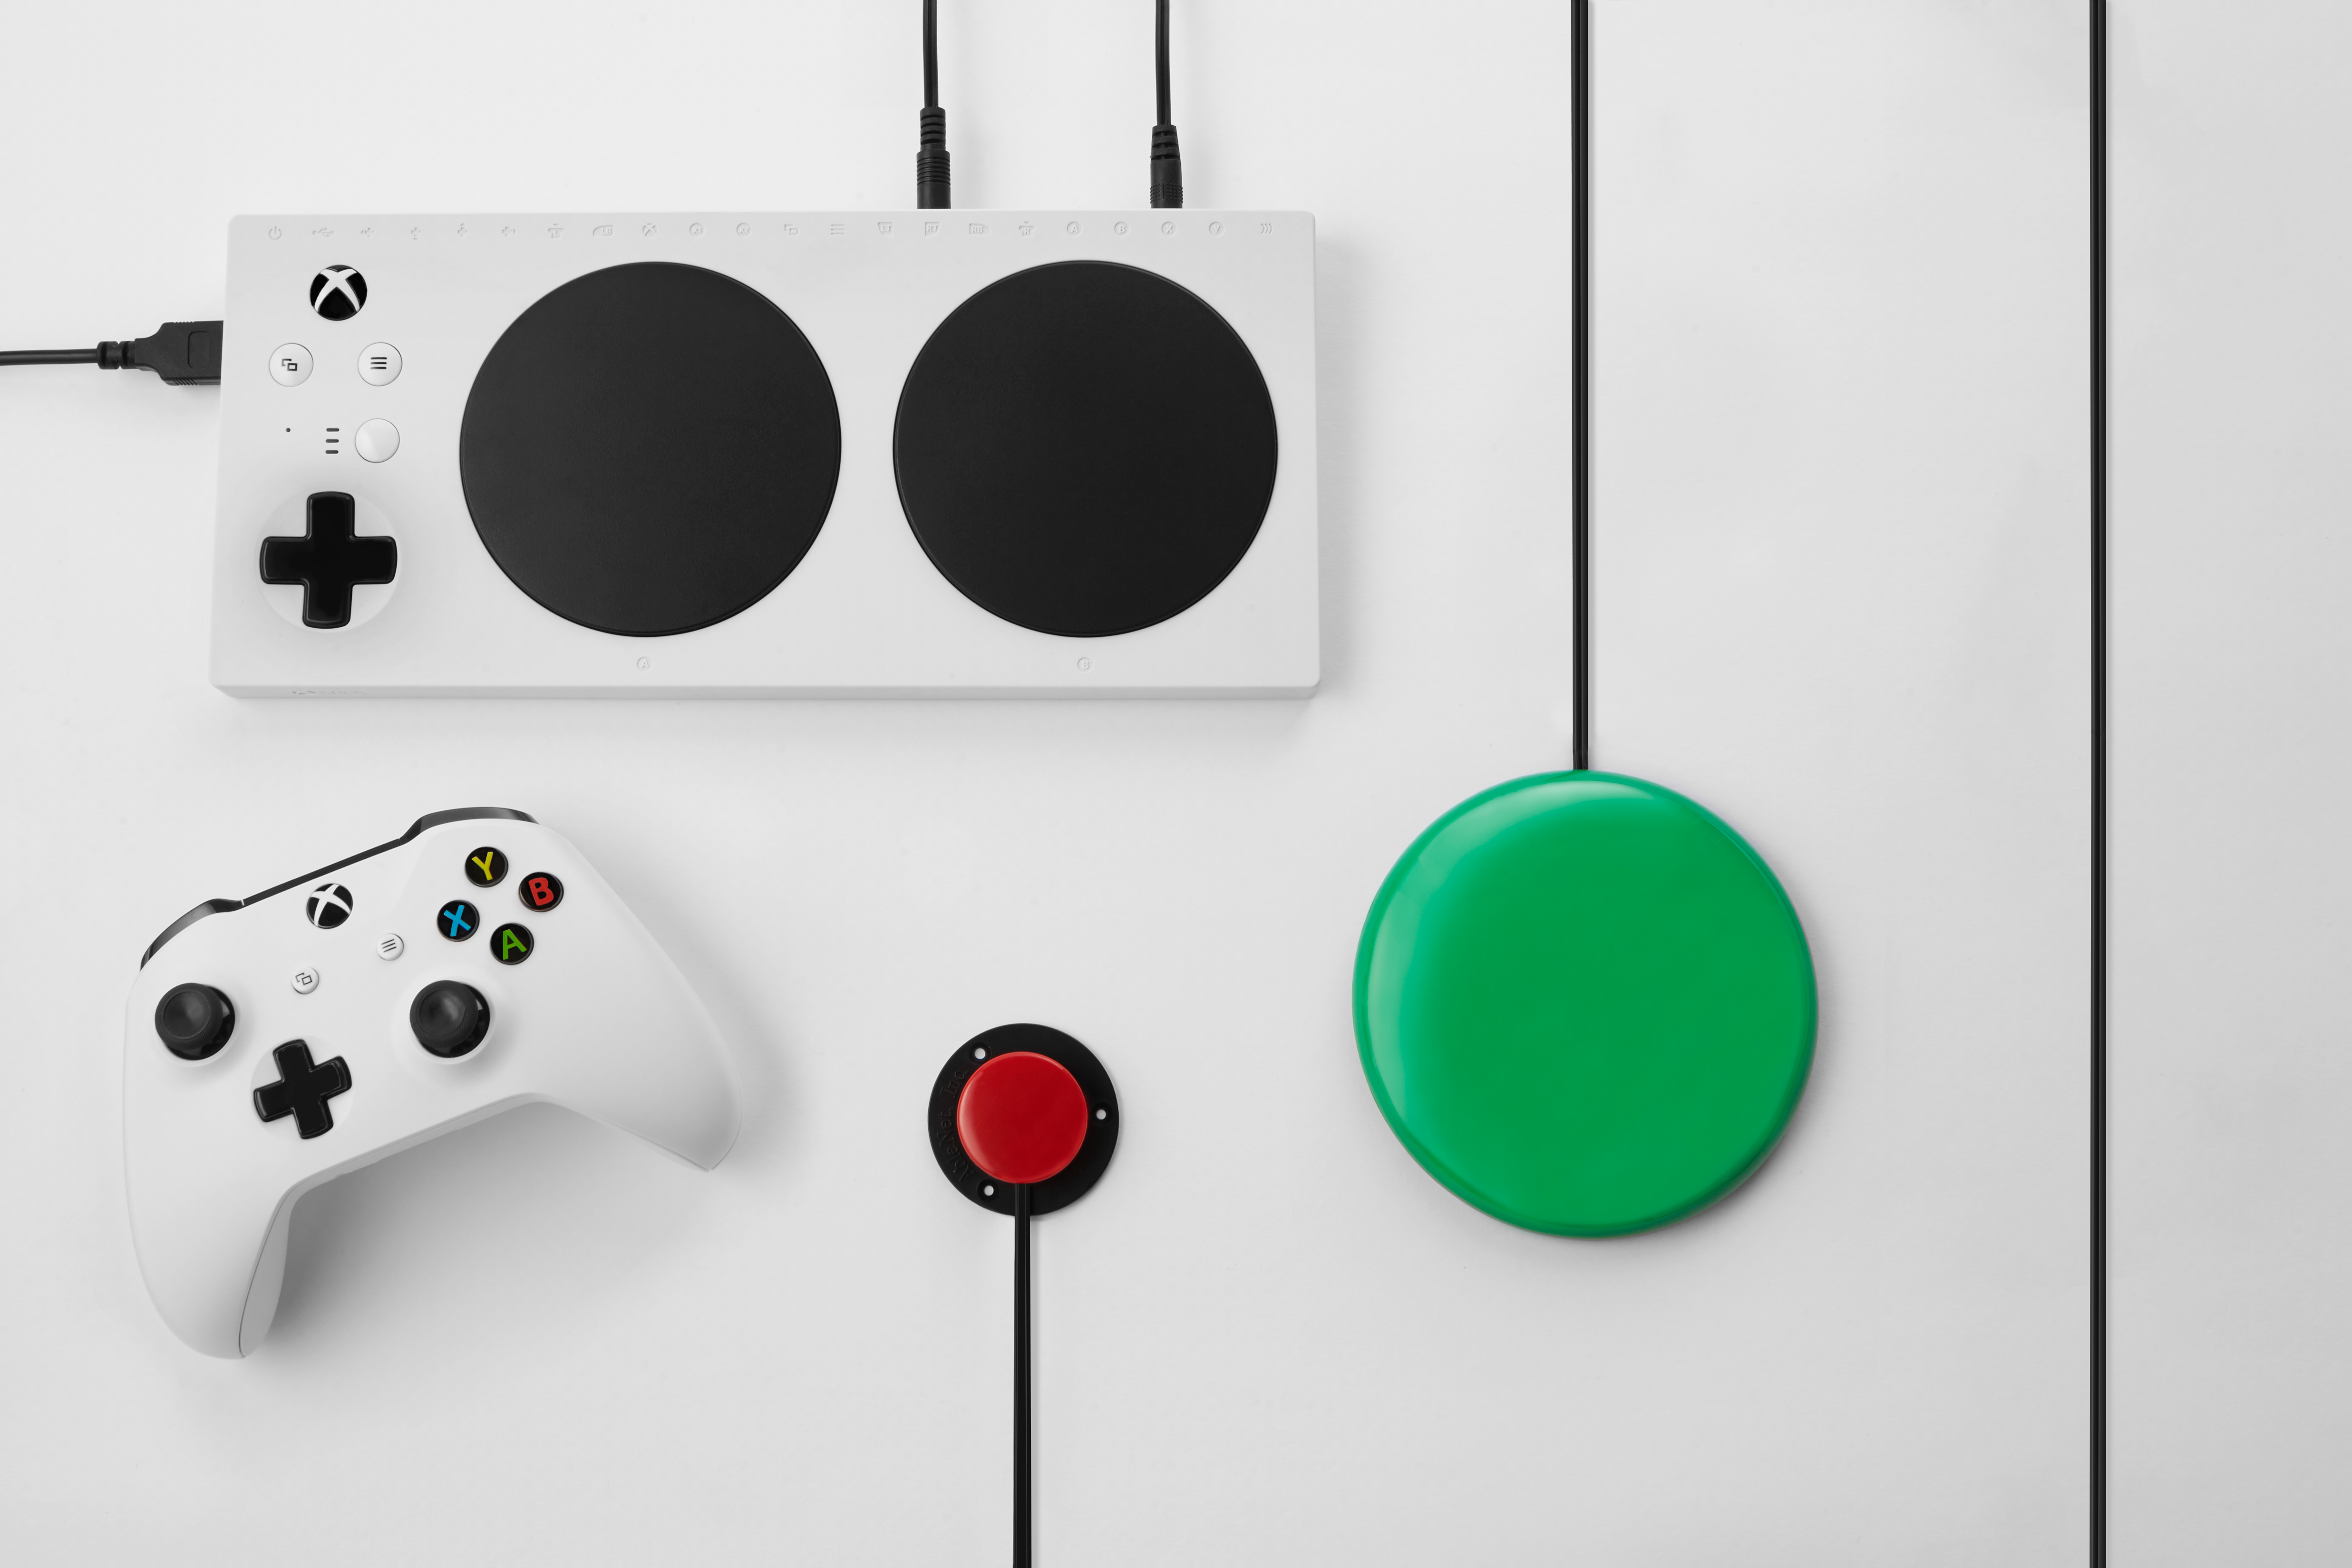 Microsoft's Xbox Adaptive controller with accessories and Xbox One controller.